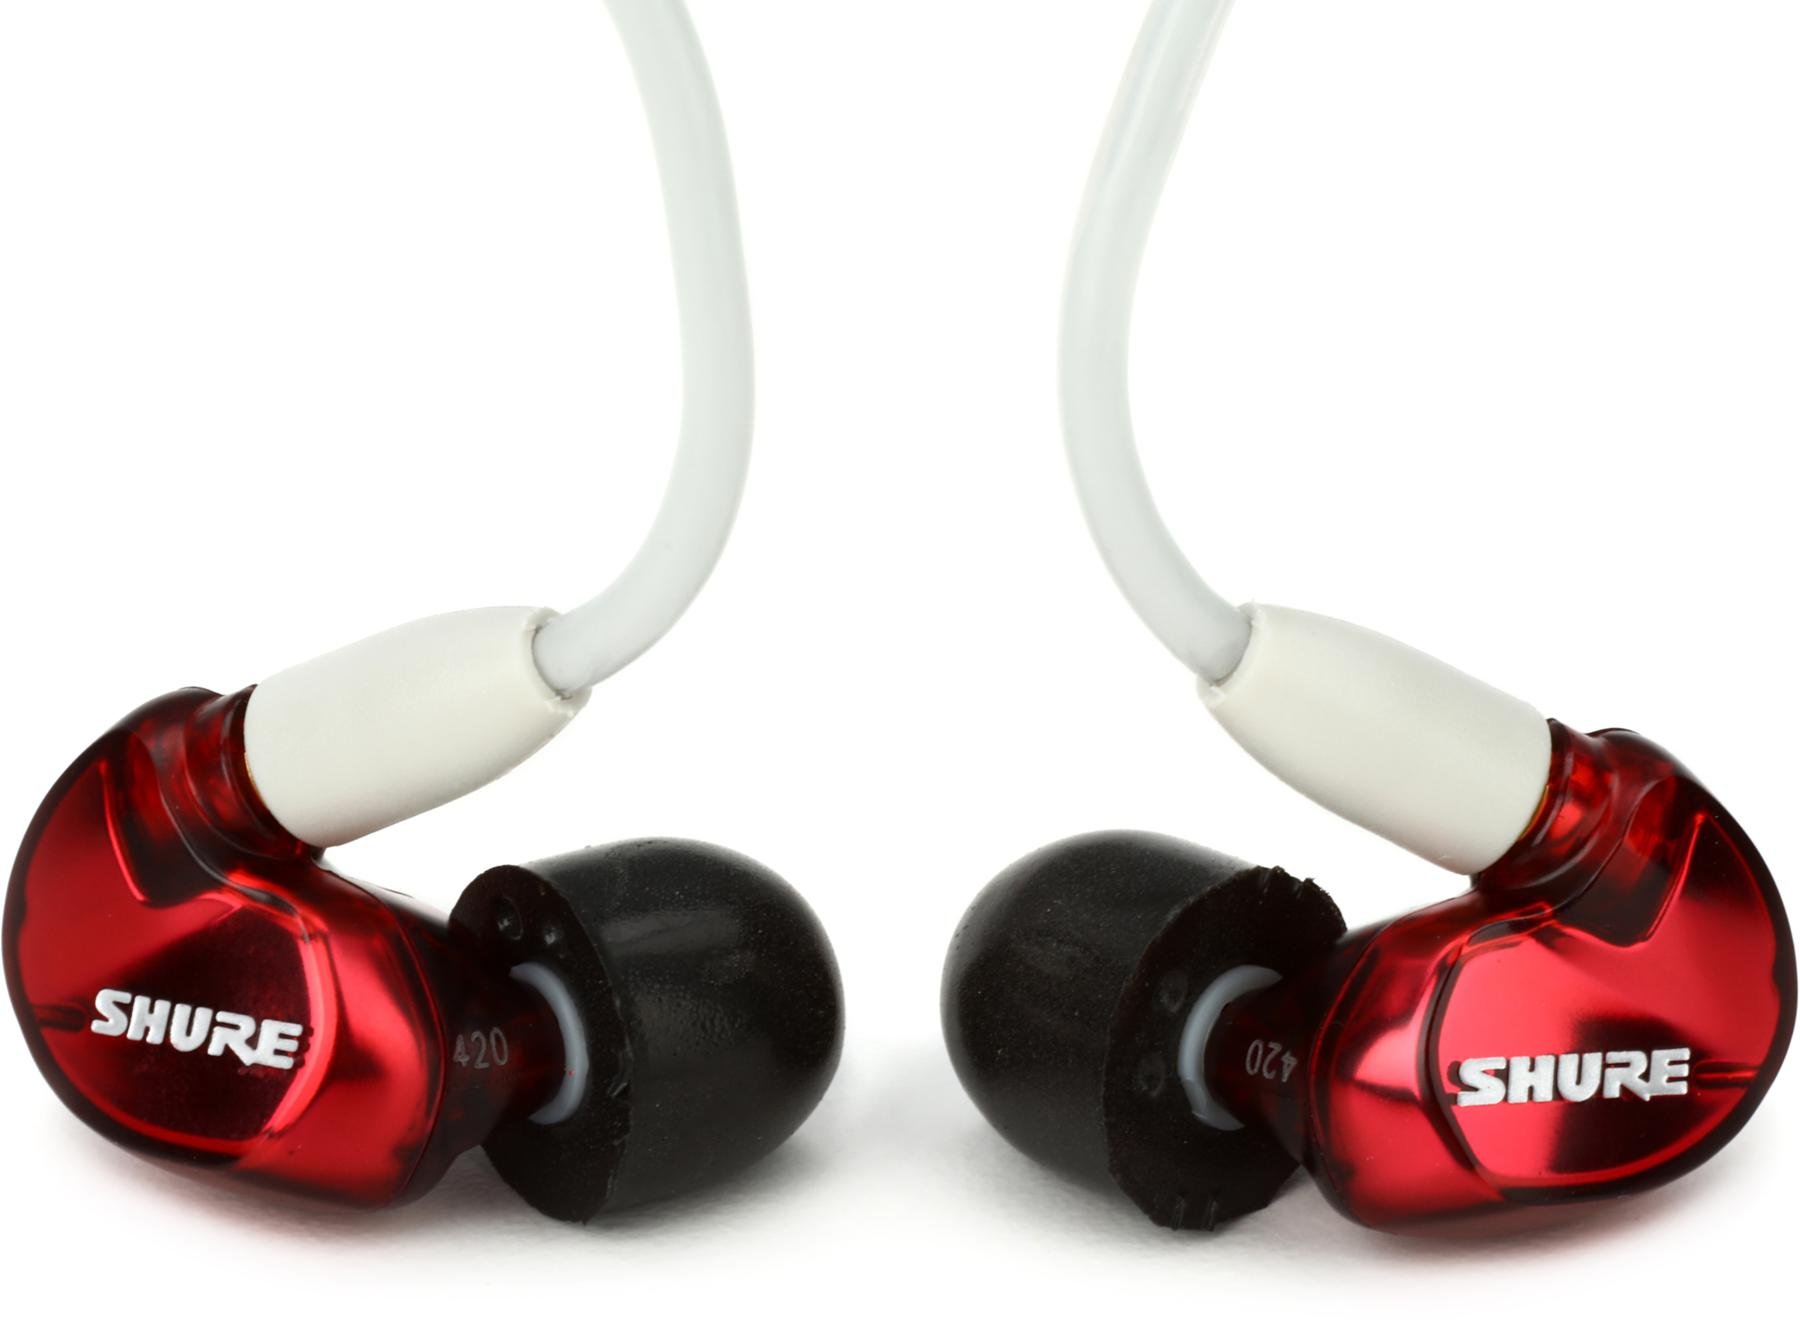 Remote and Mic Shure SE535 Sound Isolating Earphones with 3.5mm Cable Limited Edition Red